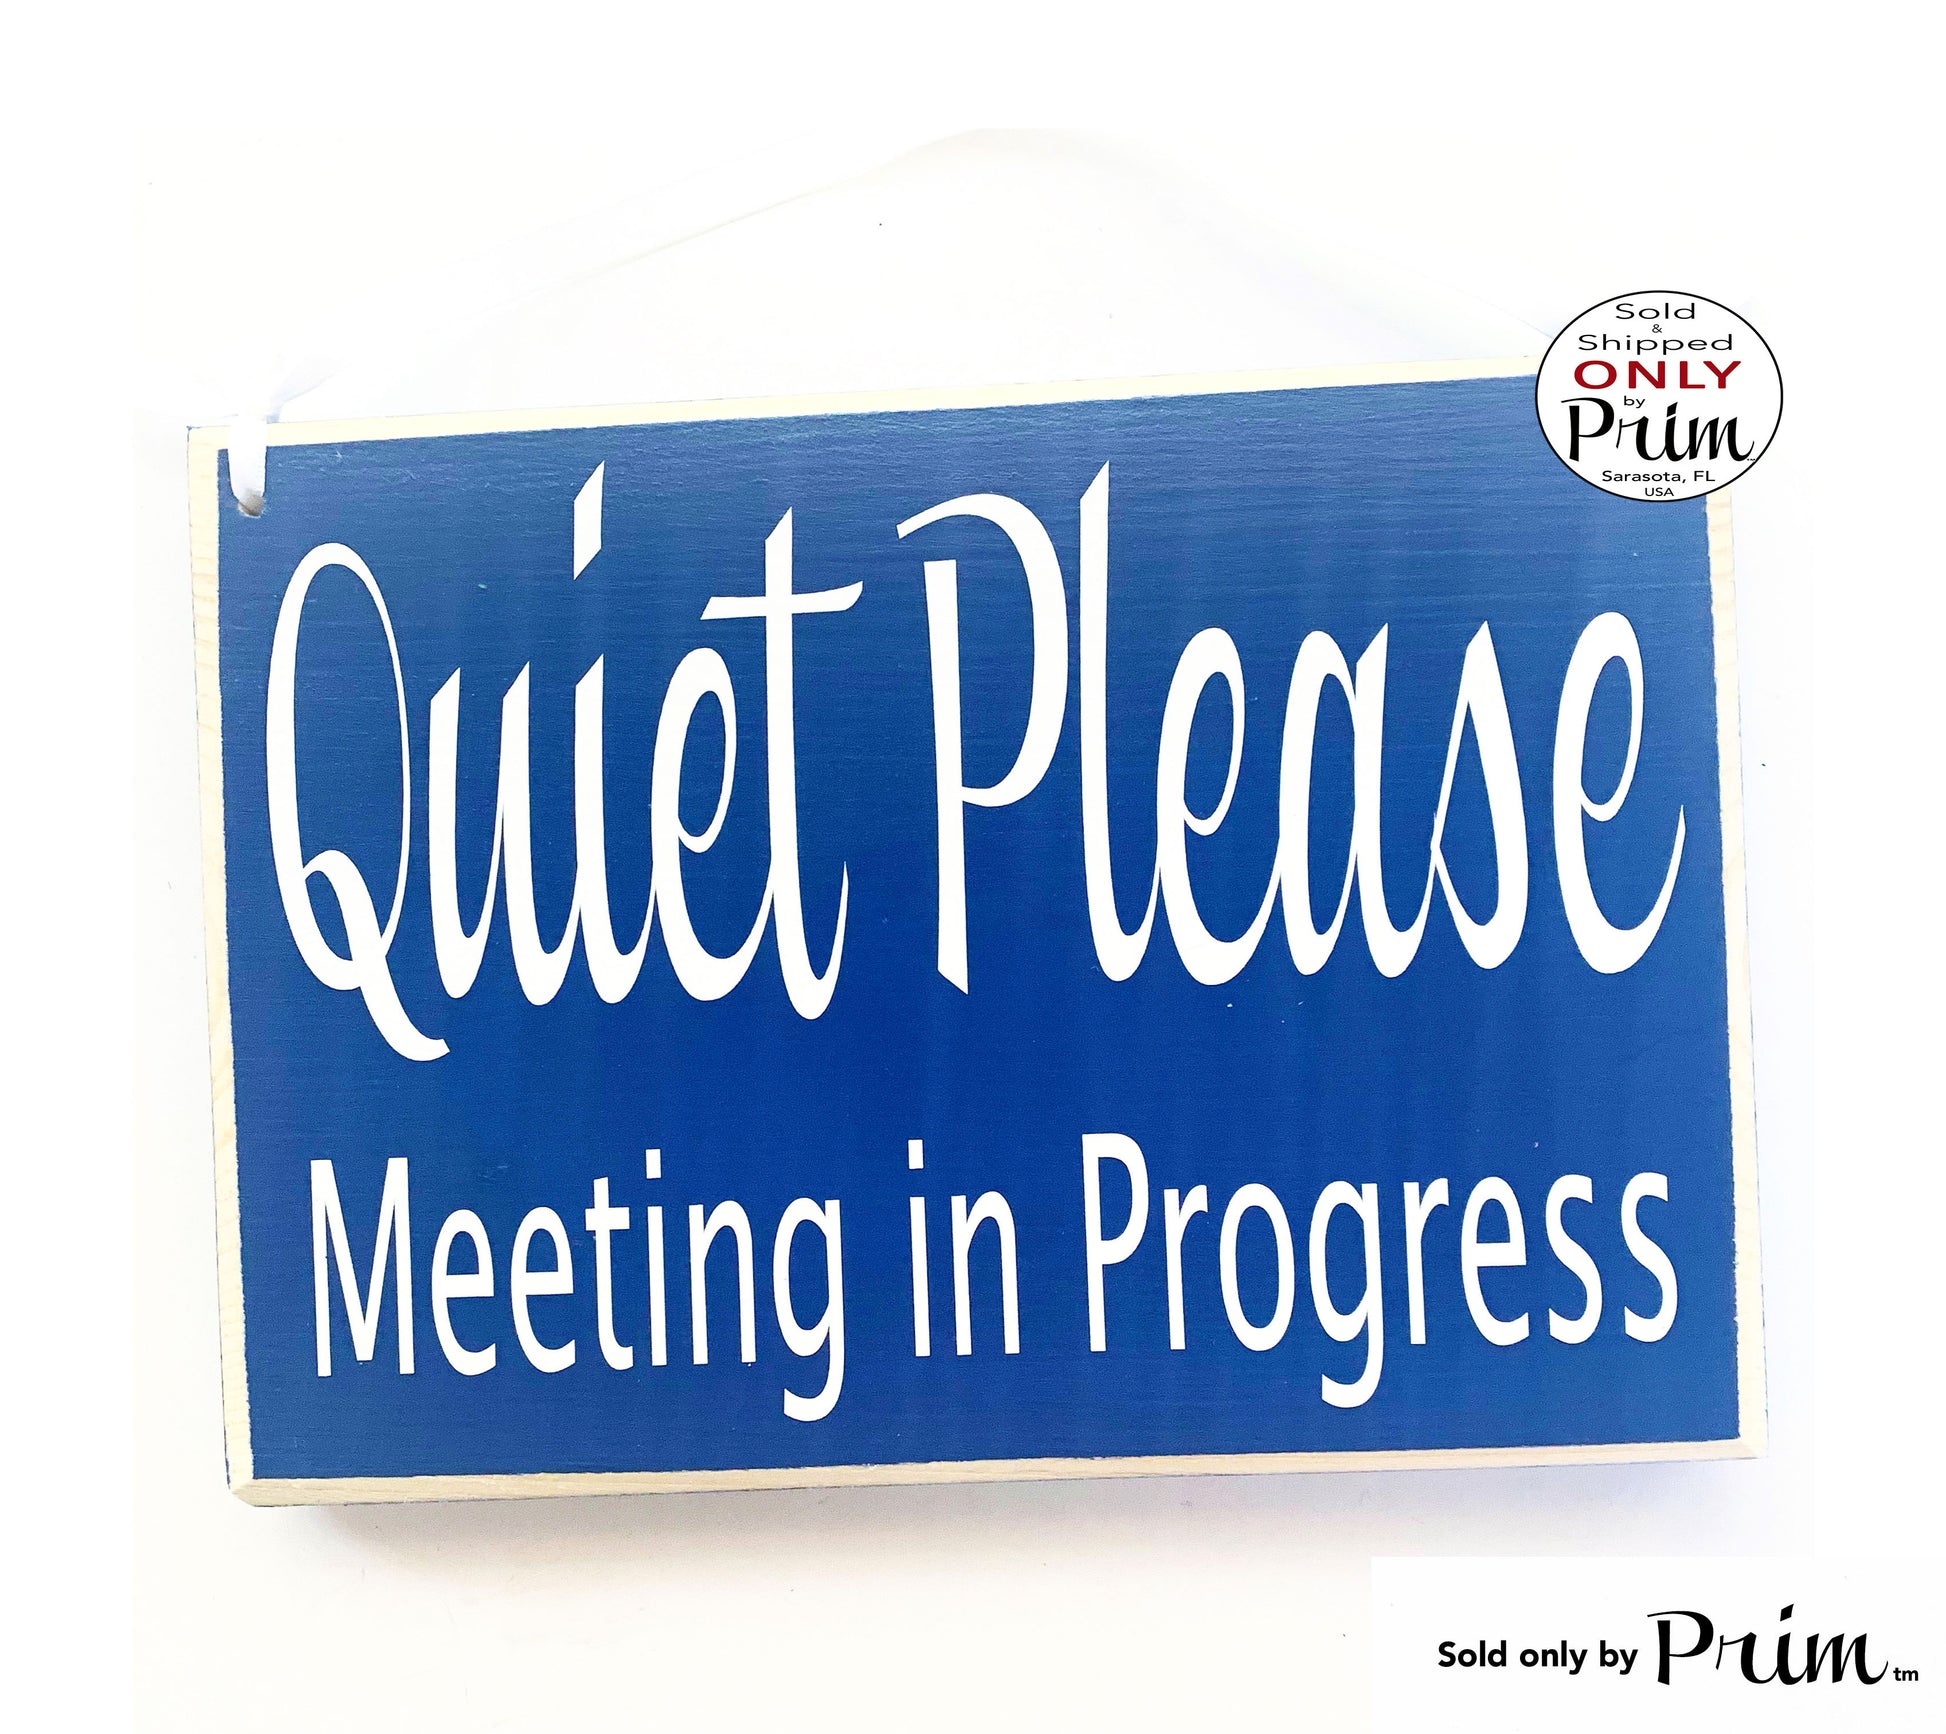 8x6 Quiet Meeting In Progress Custom Wood Sign Please Do Not Disturb The Zone Welcome In Session Progress Conference Office Workspace Door Plaque Designs by Prim